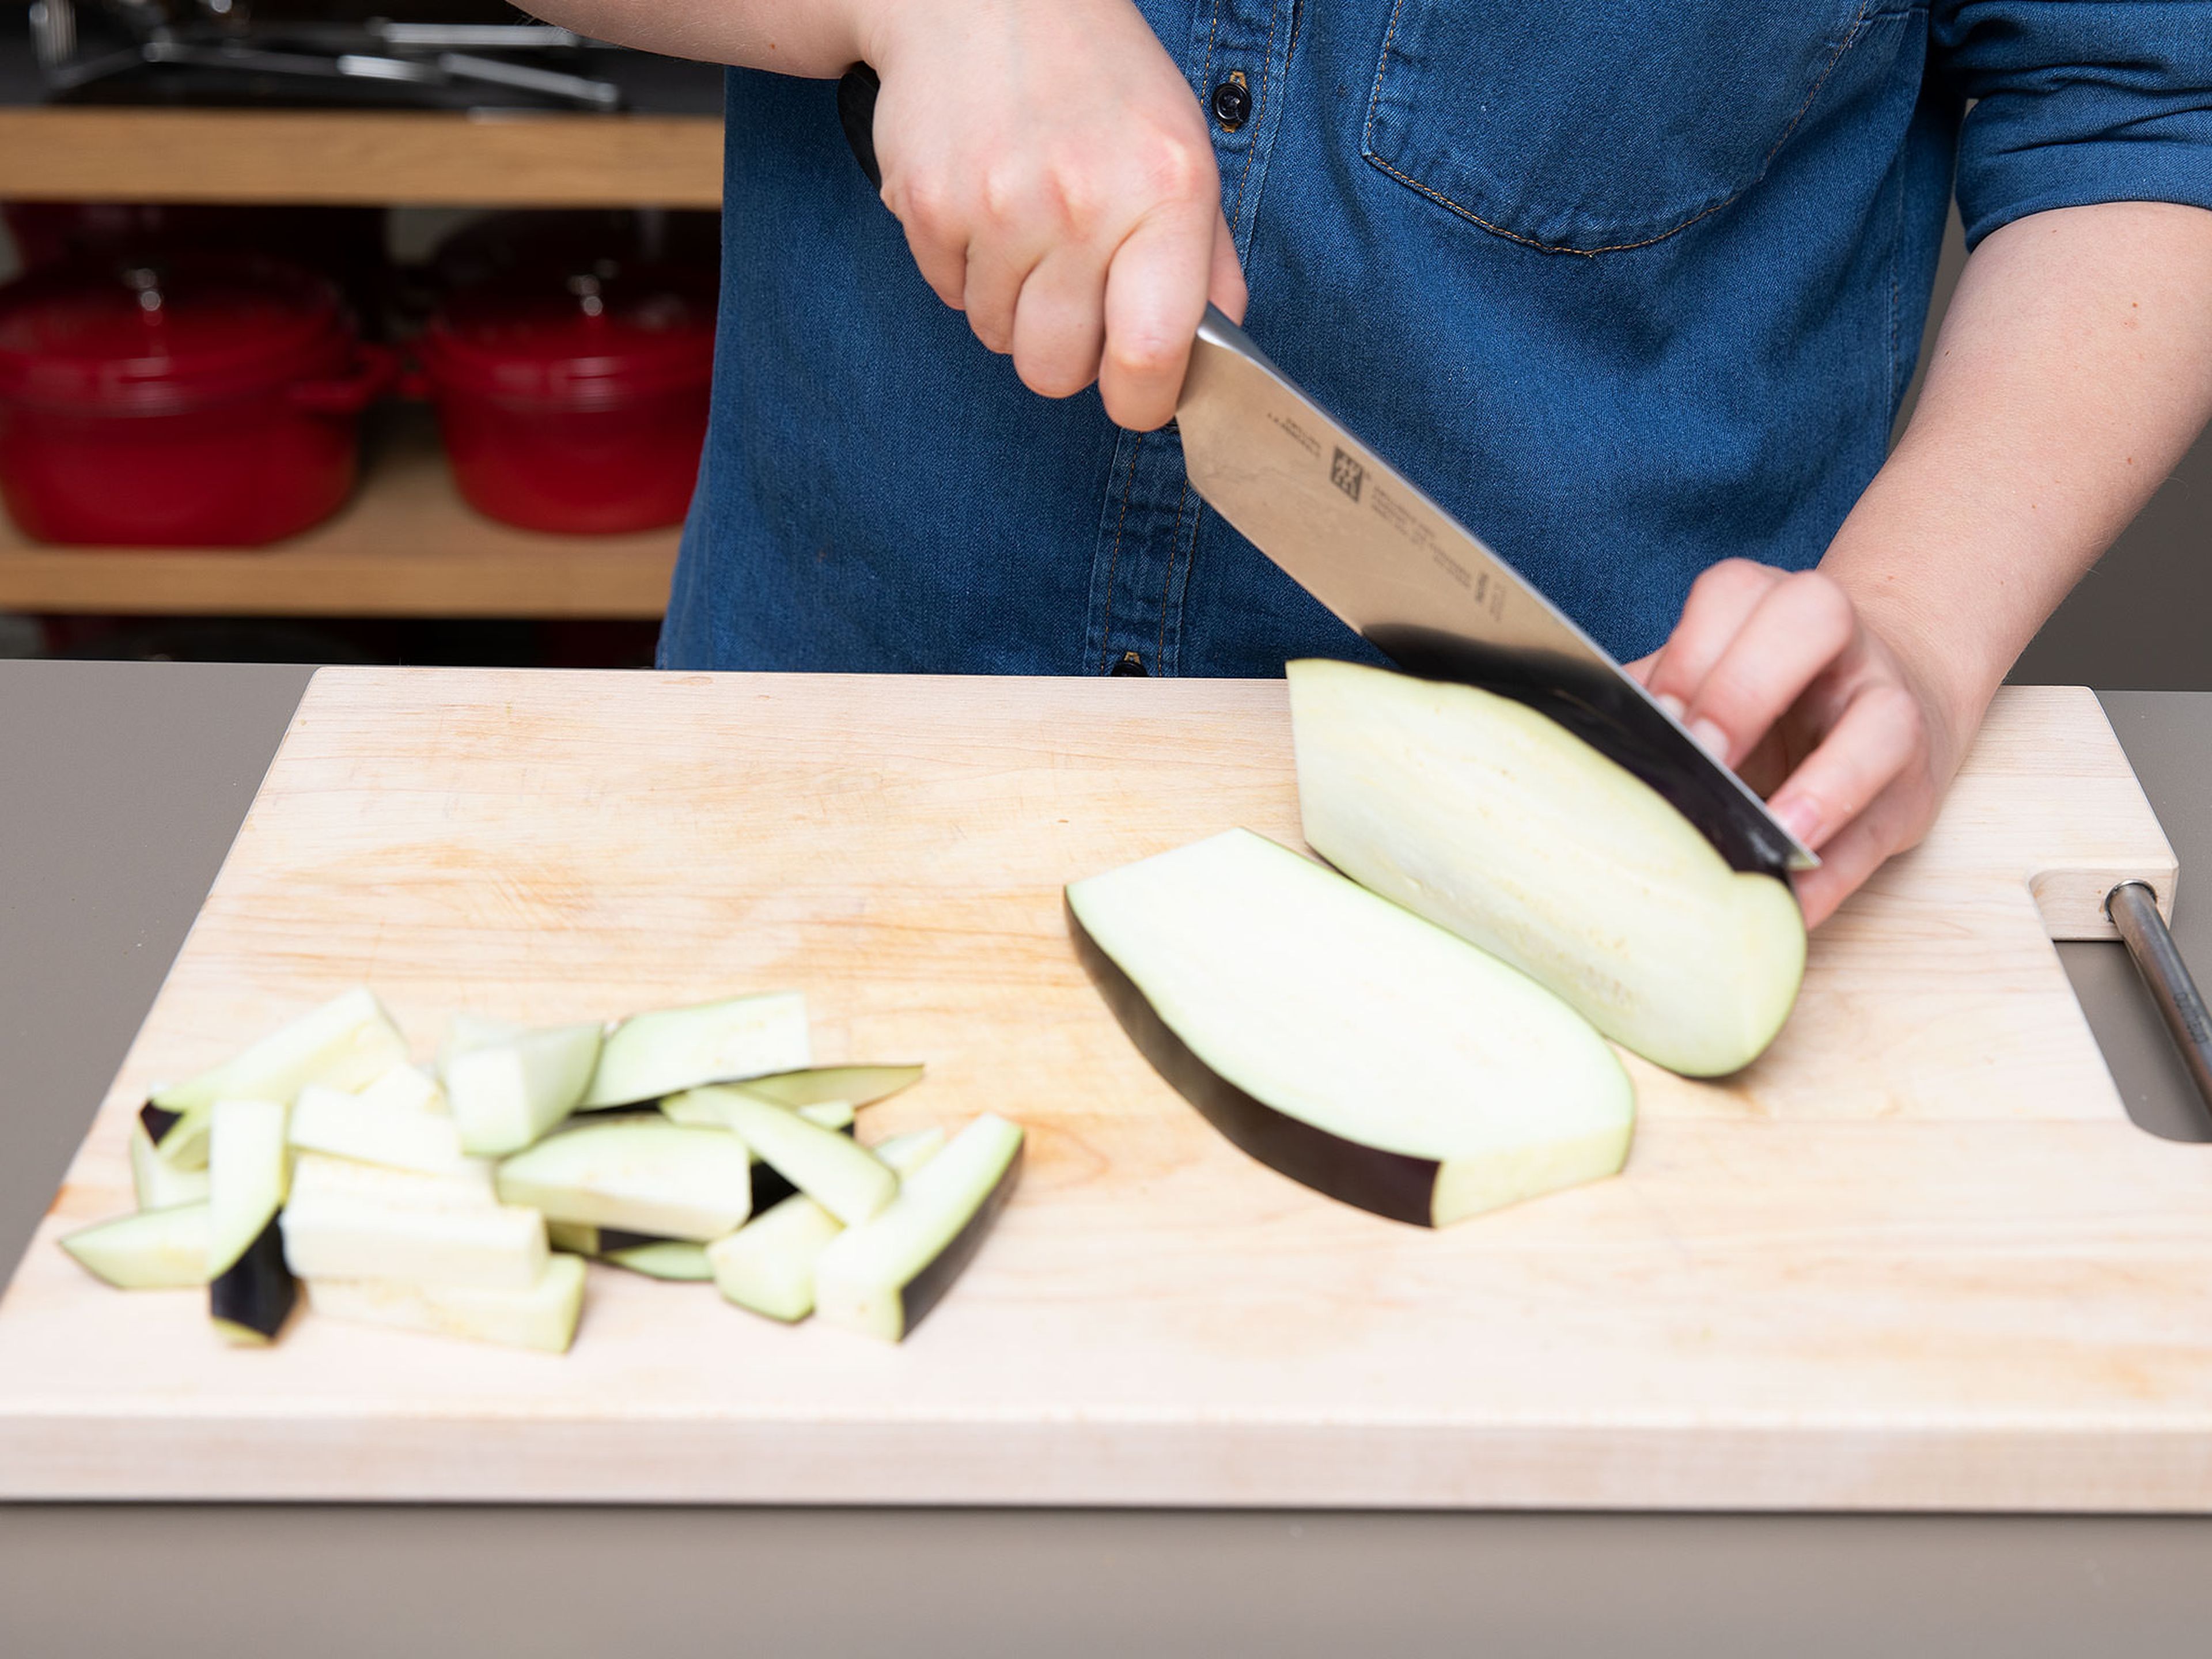 Preheat oven to 180°C/350°F and line a baking sheet with parchment paper. Wash eggplant and trim off the ends. Cut a thin slice off of one side to form a flat base for safe cutting, then cut into thick matchsticks.